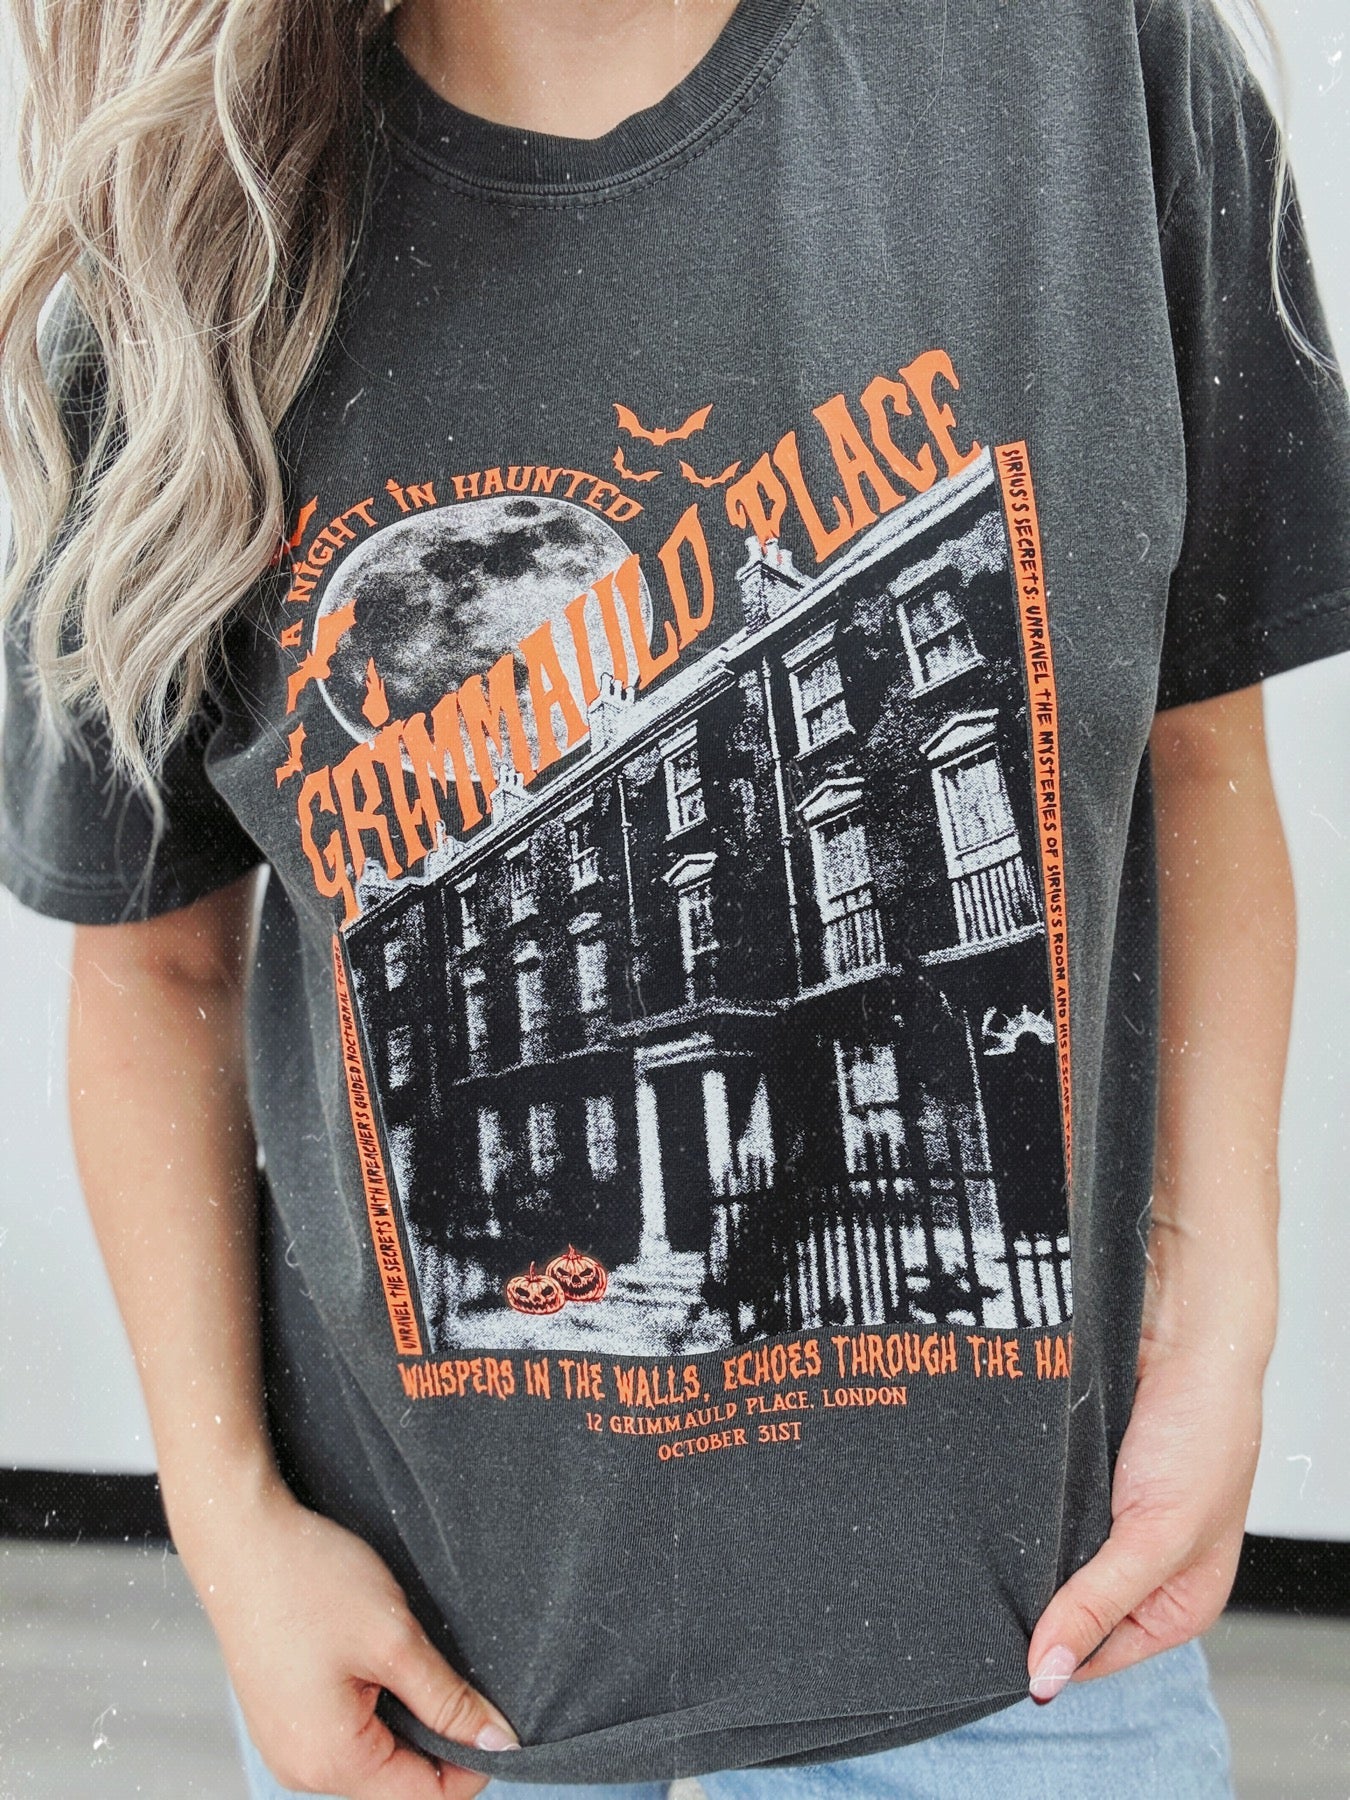 Haunted Grimmauld Place Garment Dyed Tee